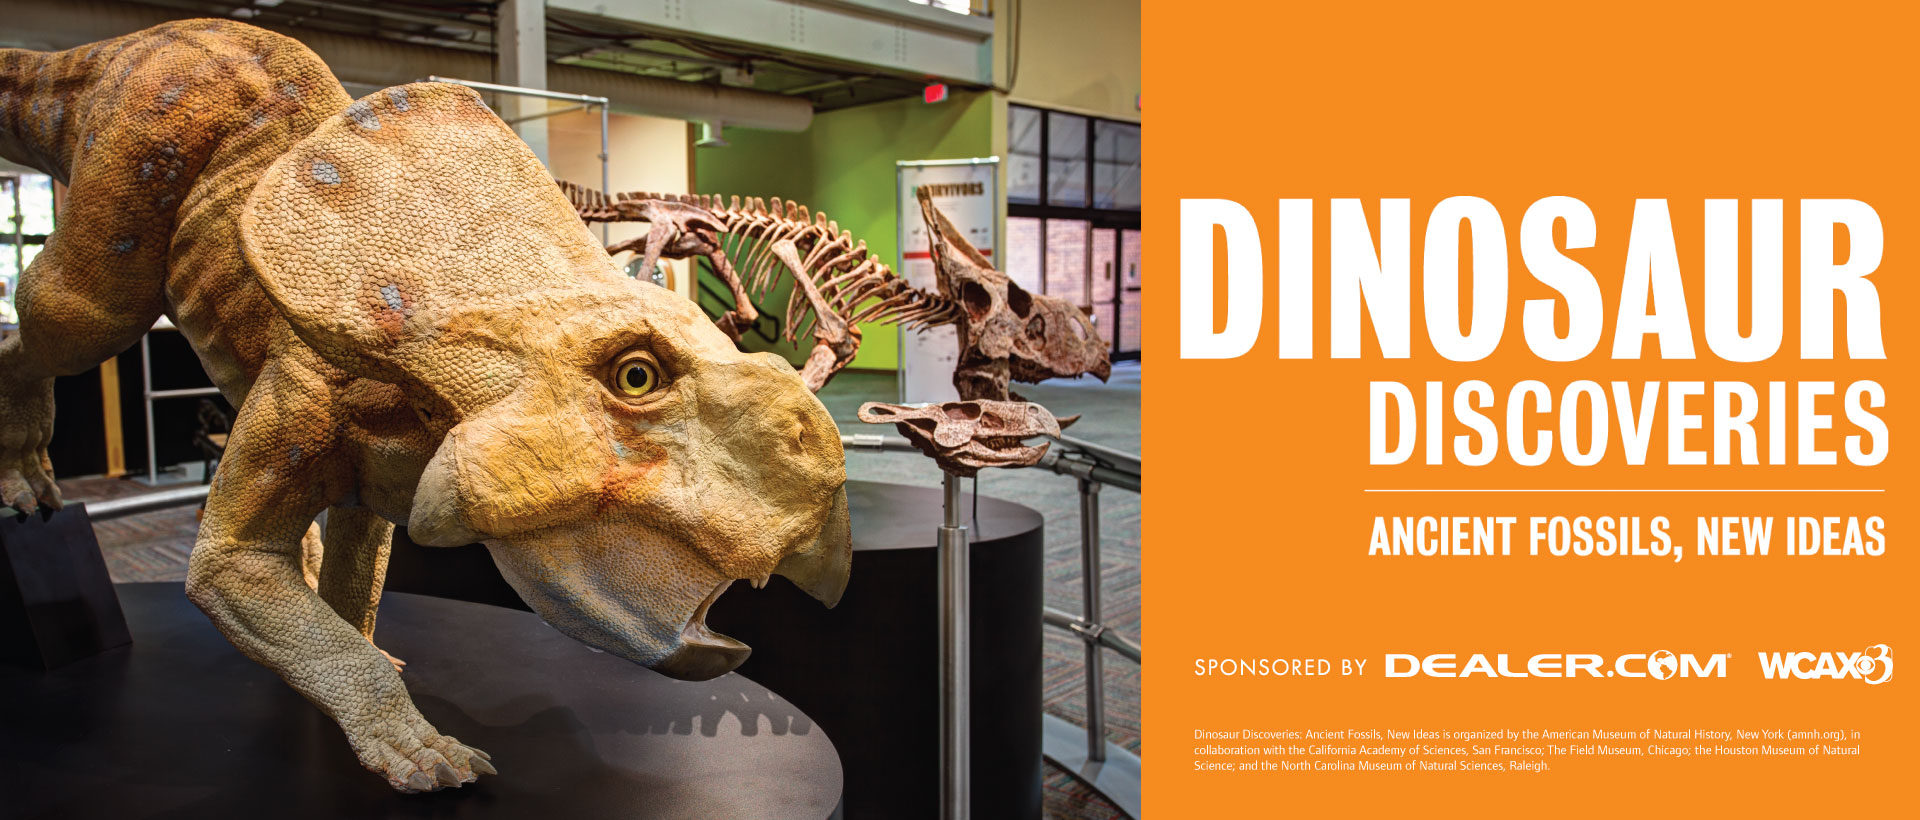 Dinosaur Discoveries, Ancient Fossils, New Ideas logo. Image of a Protoceratops model from the exhibit.